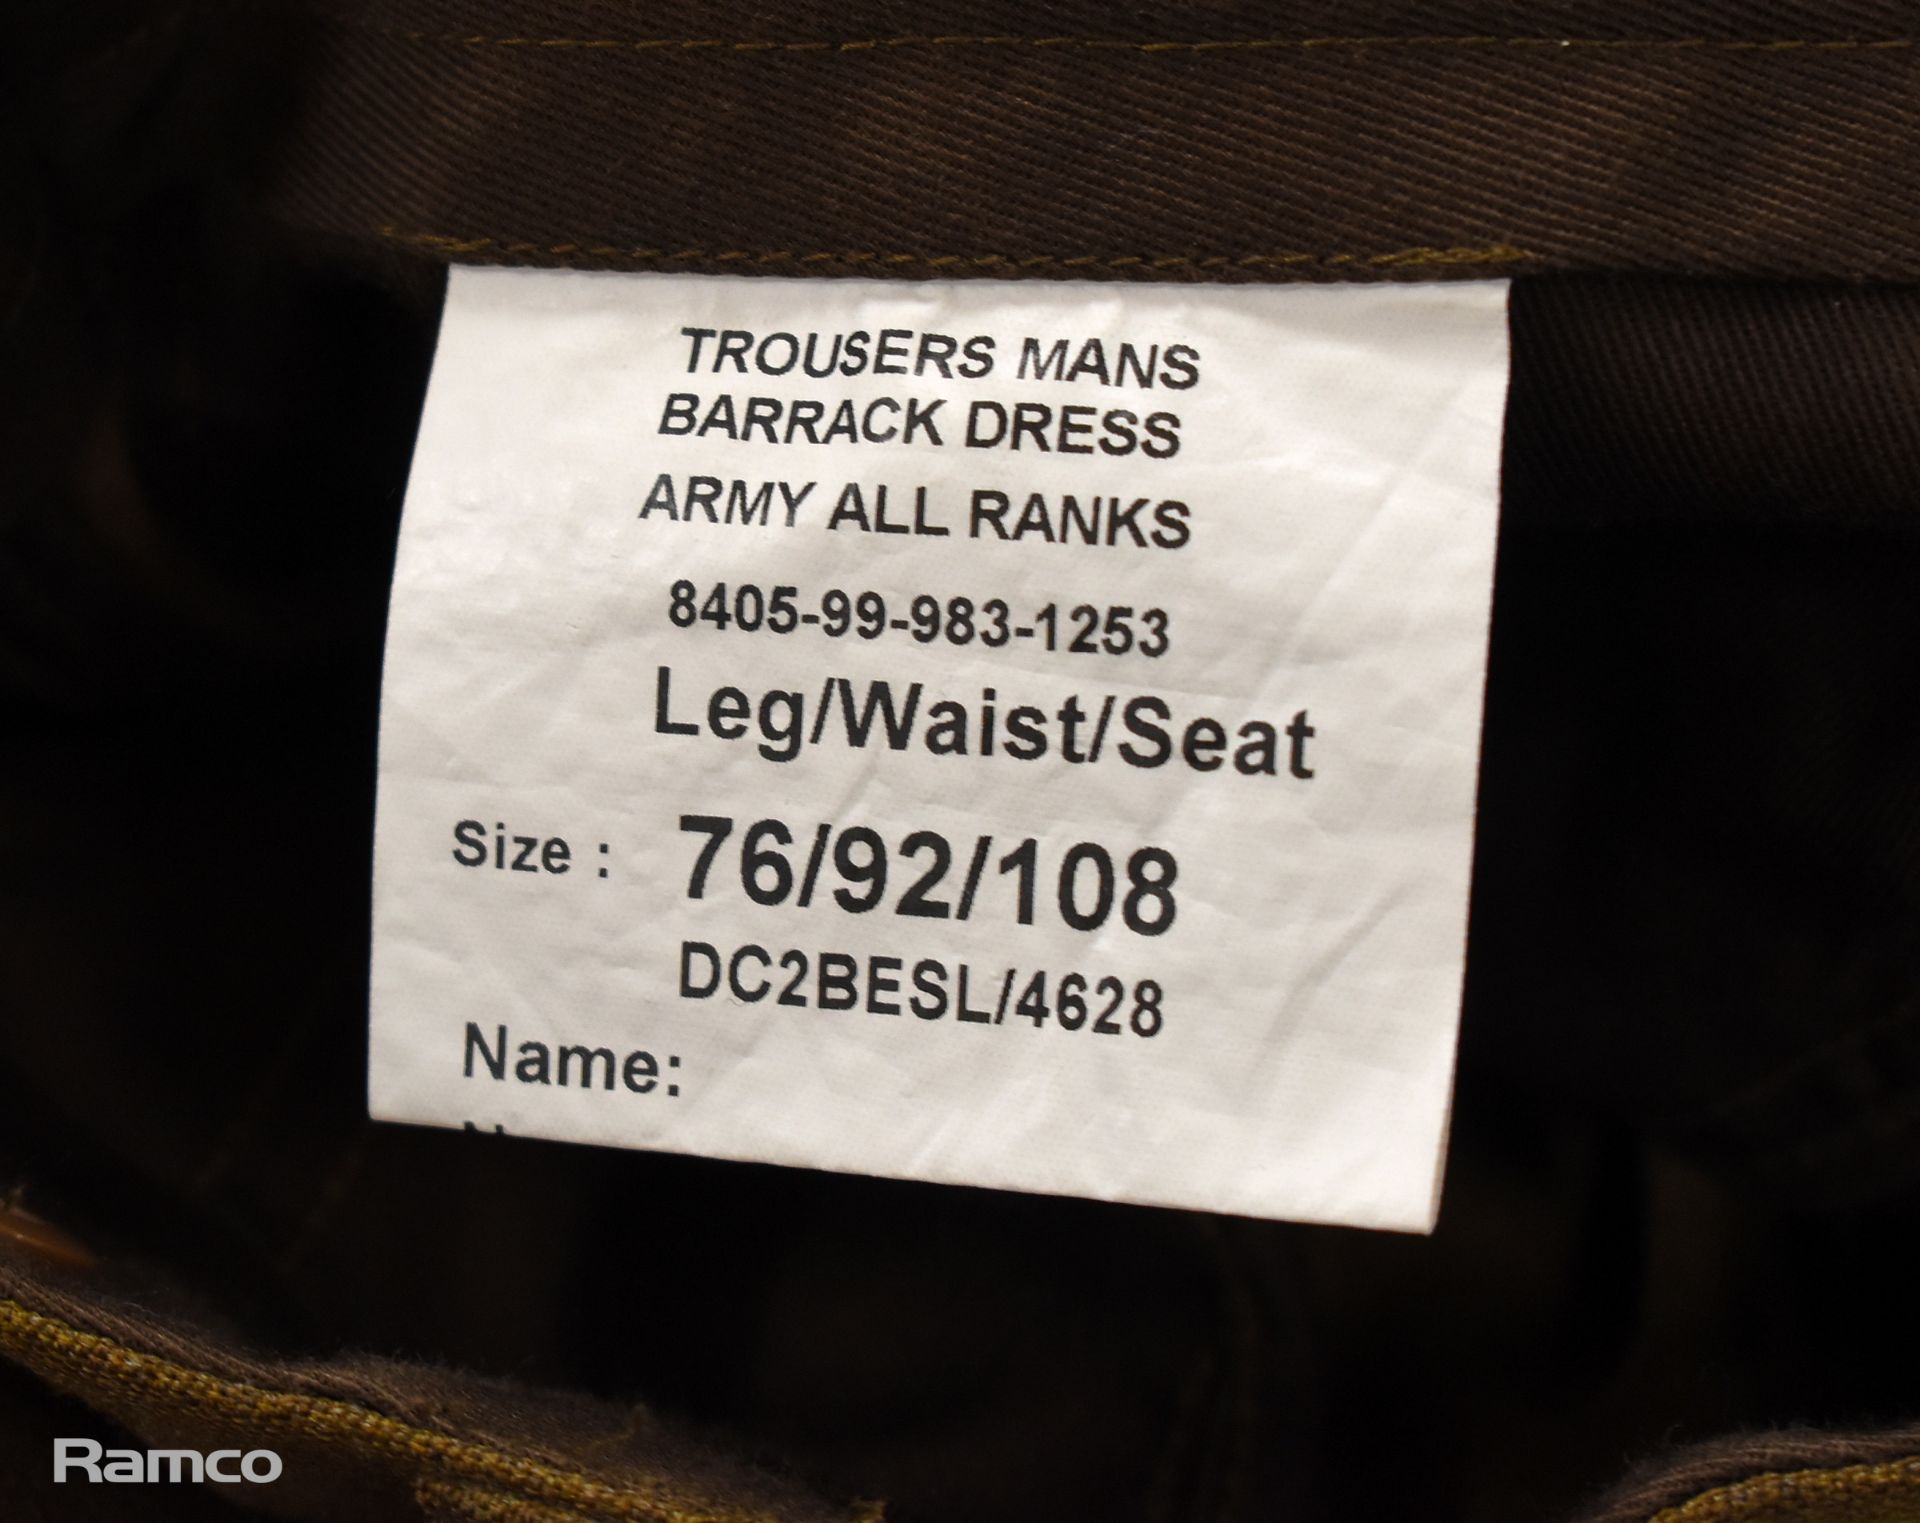 40x British Army No. 2 Dress trousers - mixed grades and sizes - Image 8 of 11